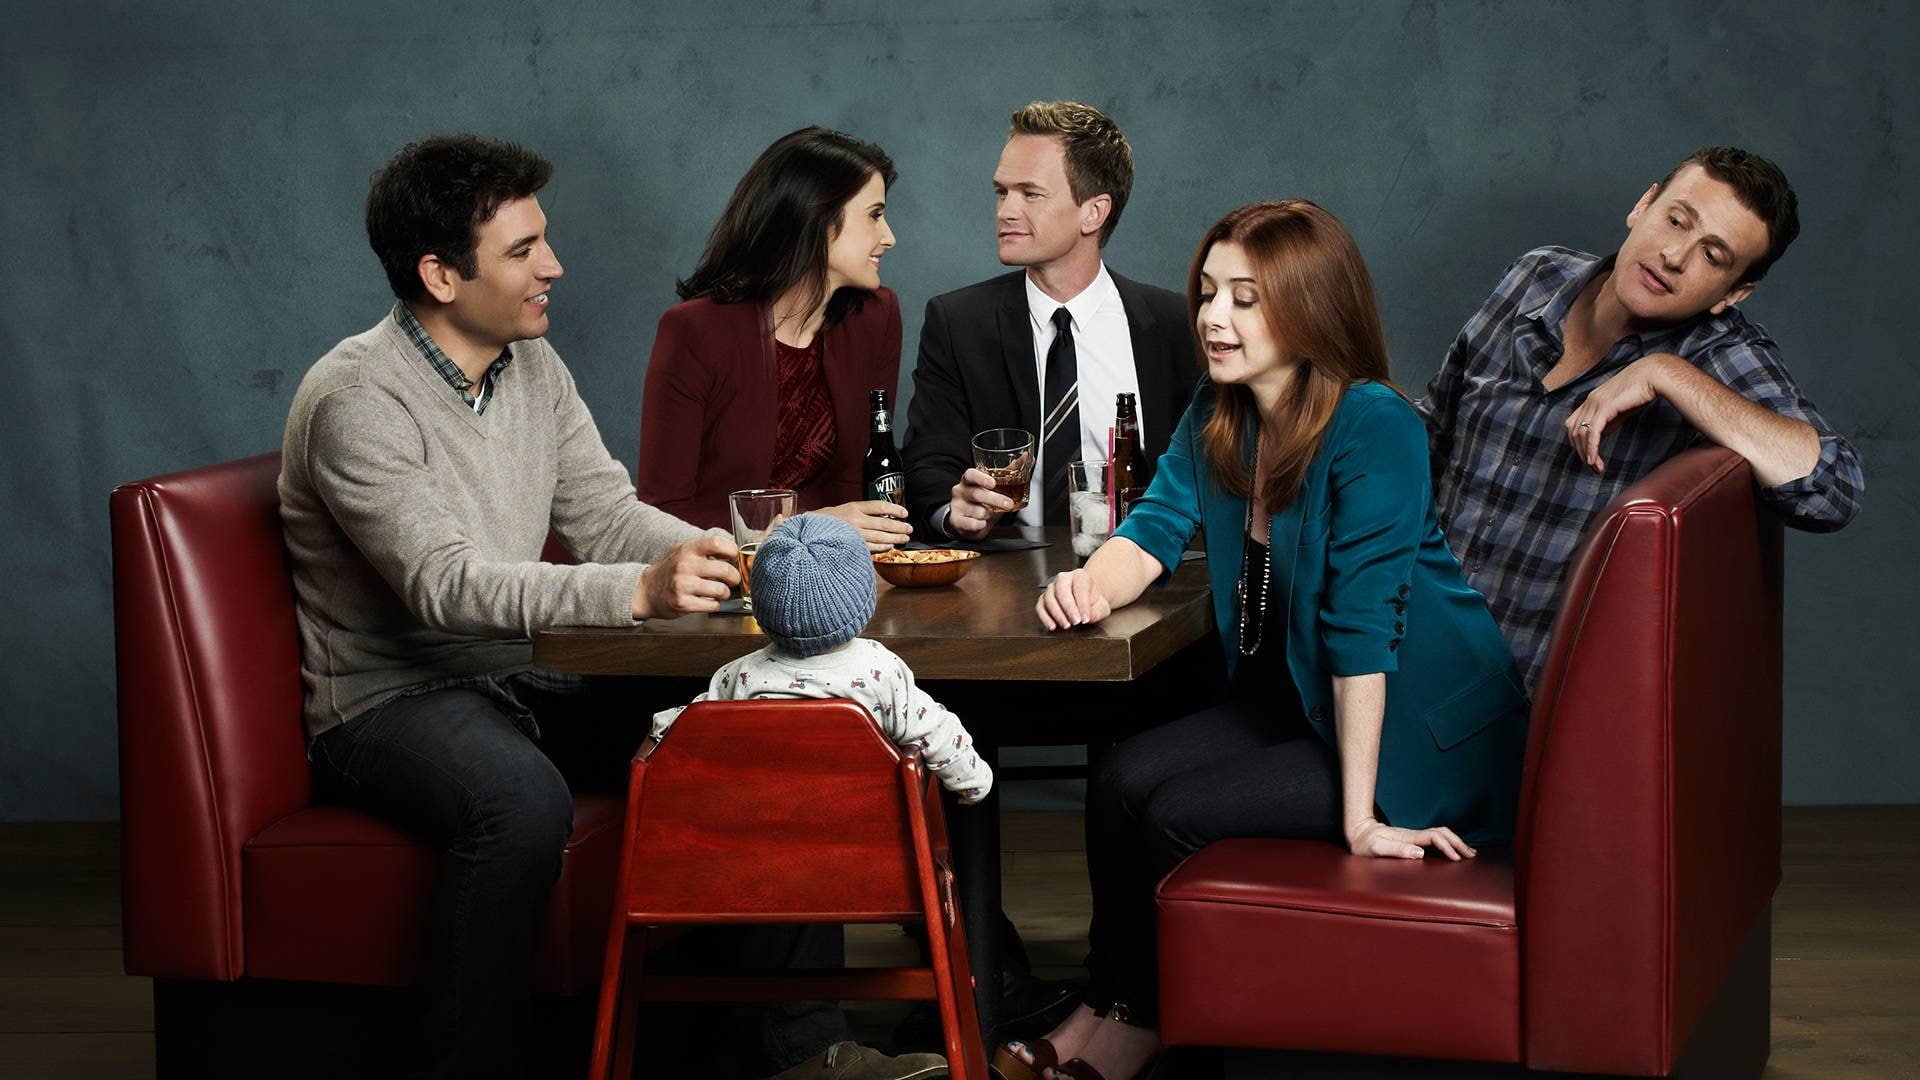 comedy, how i met your mother, series, sitcom, television